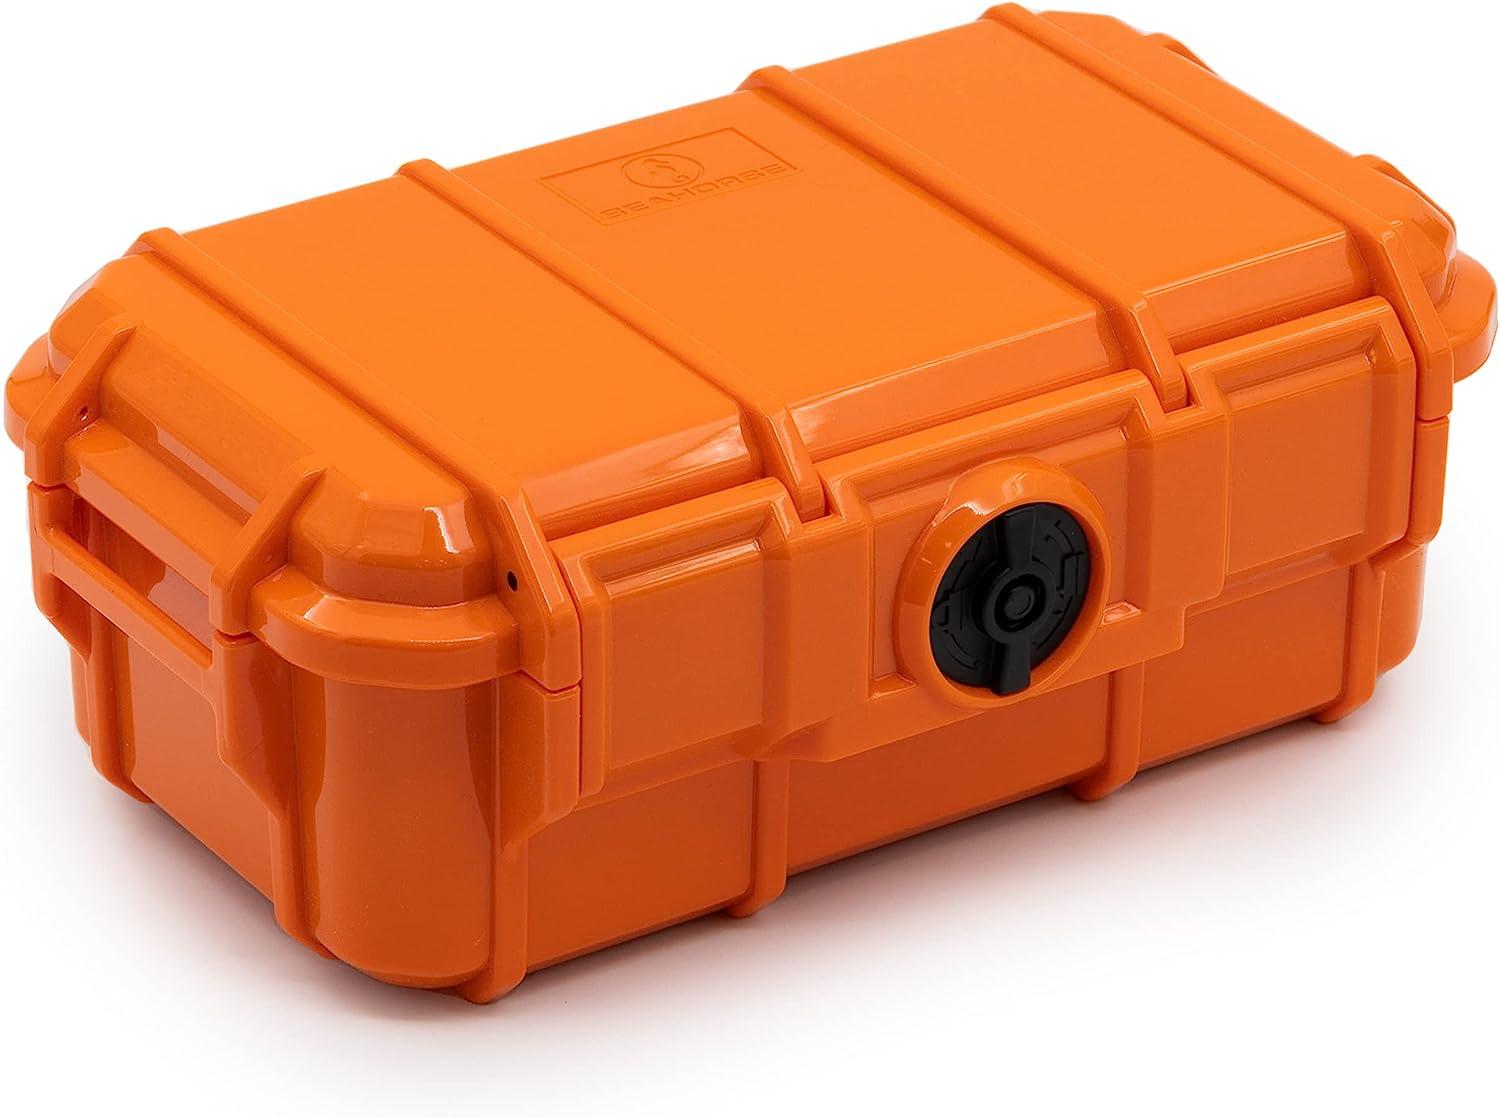 Evergreen 57 Waterproof Dry Box Protective Case - Travel Safe/Mil Spec/USA  Made - for Cameras, Phones, Ammo Can, Camping, Hiking, Boating, Water  Sports, Knives, & Survival (Orange)